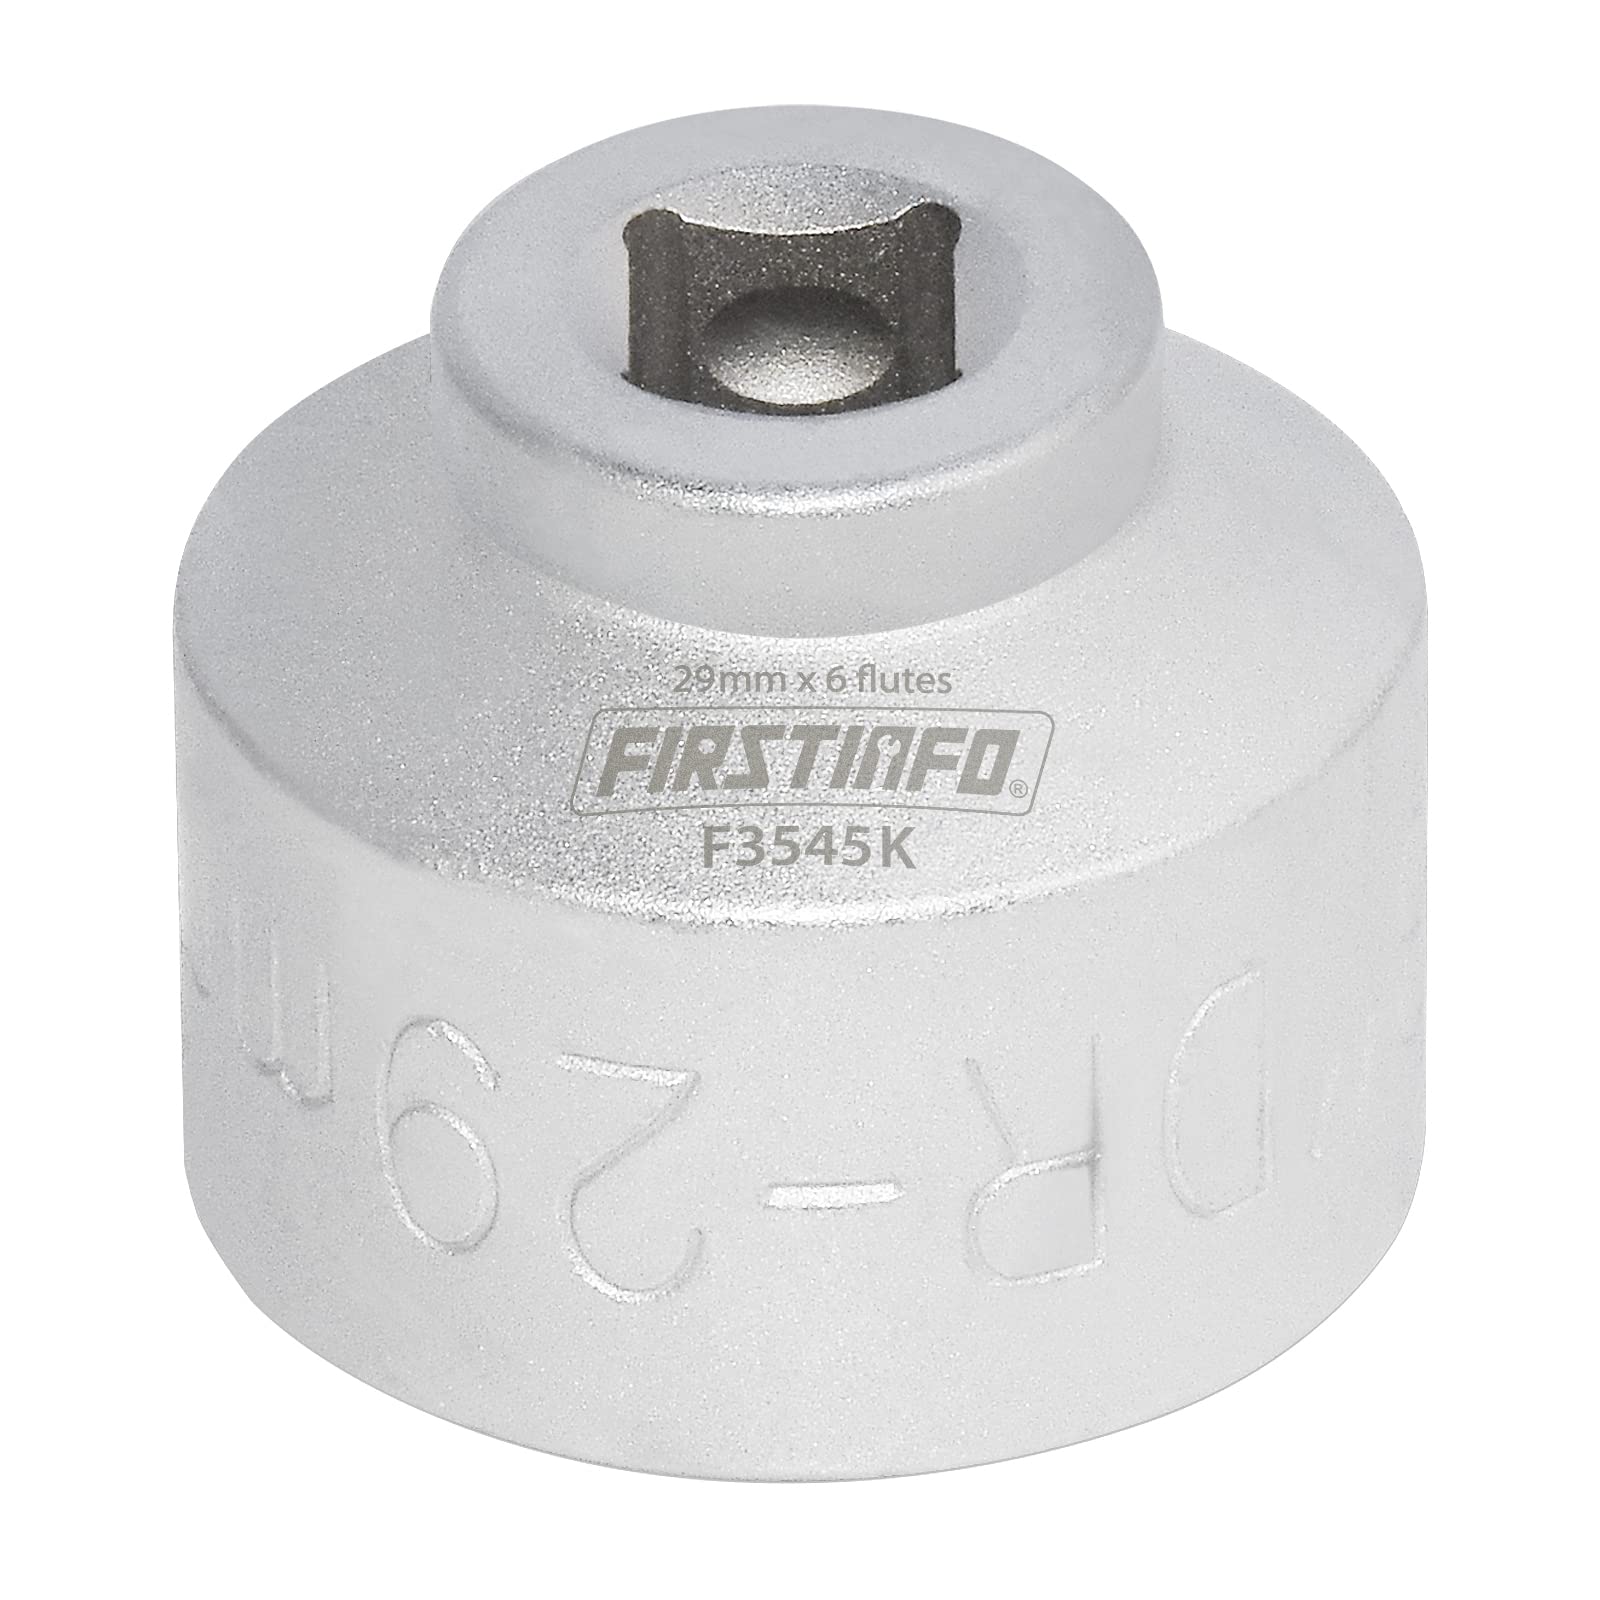 FIRSTINFO TOOLS FIT Firstinfo 29Mm Hex Low Profile Oil Filter Wrench Socket For All Dodge Cummins Fuel Filter Housing, 38 Drive Oil Filter Removal T